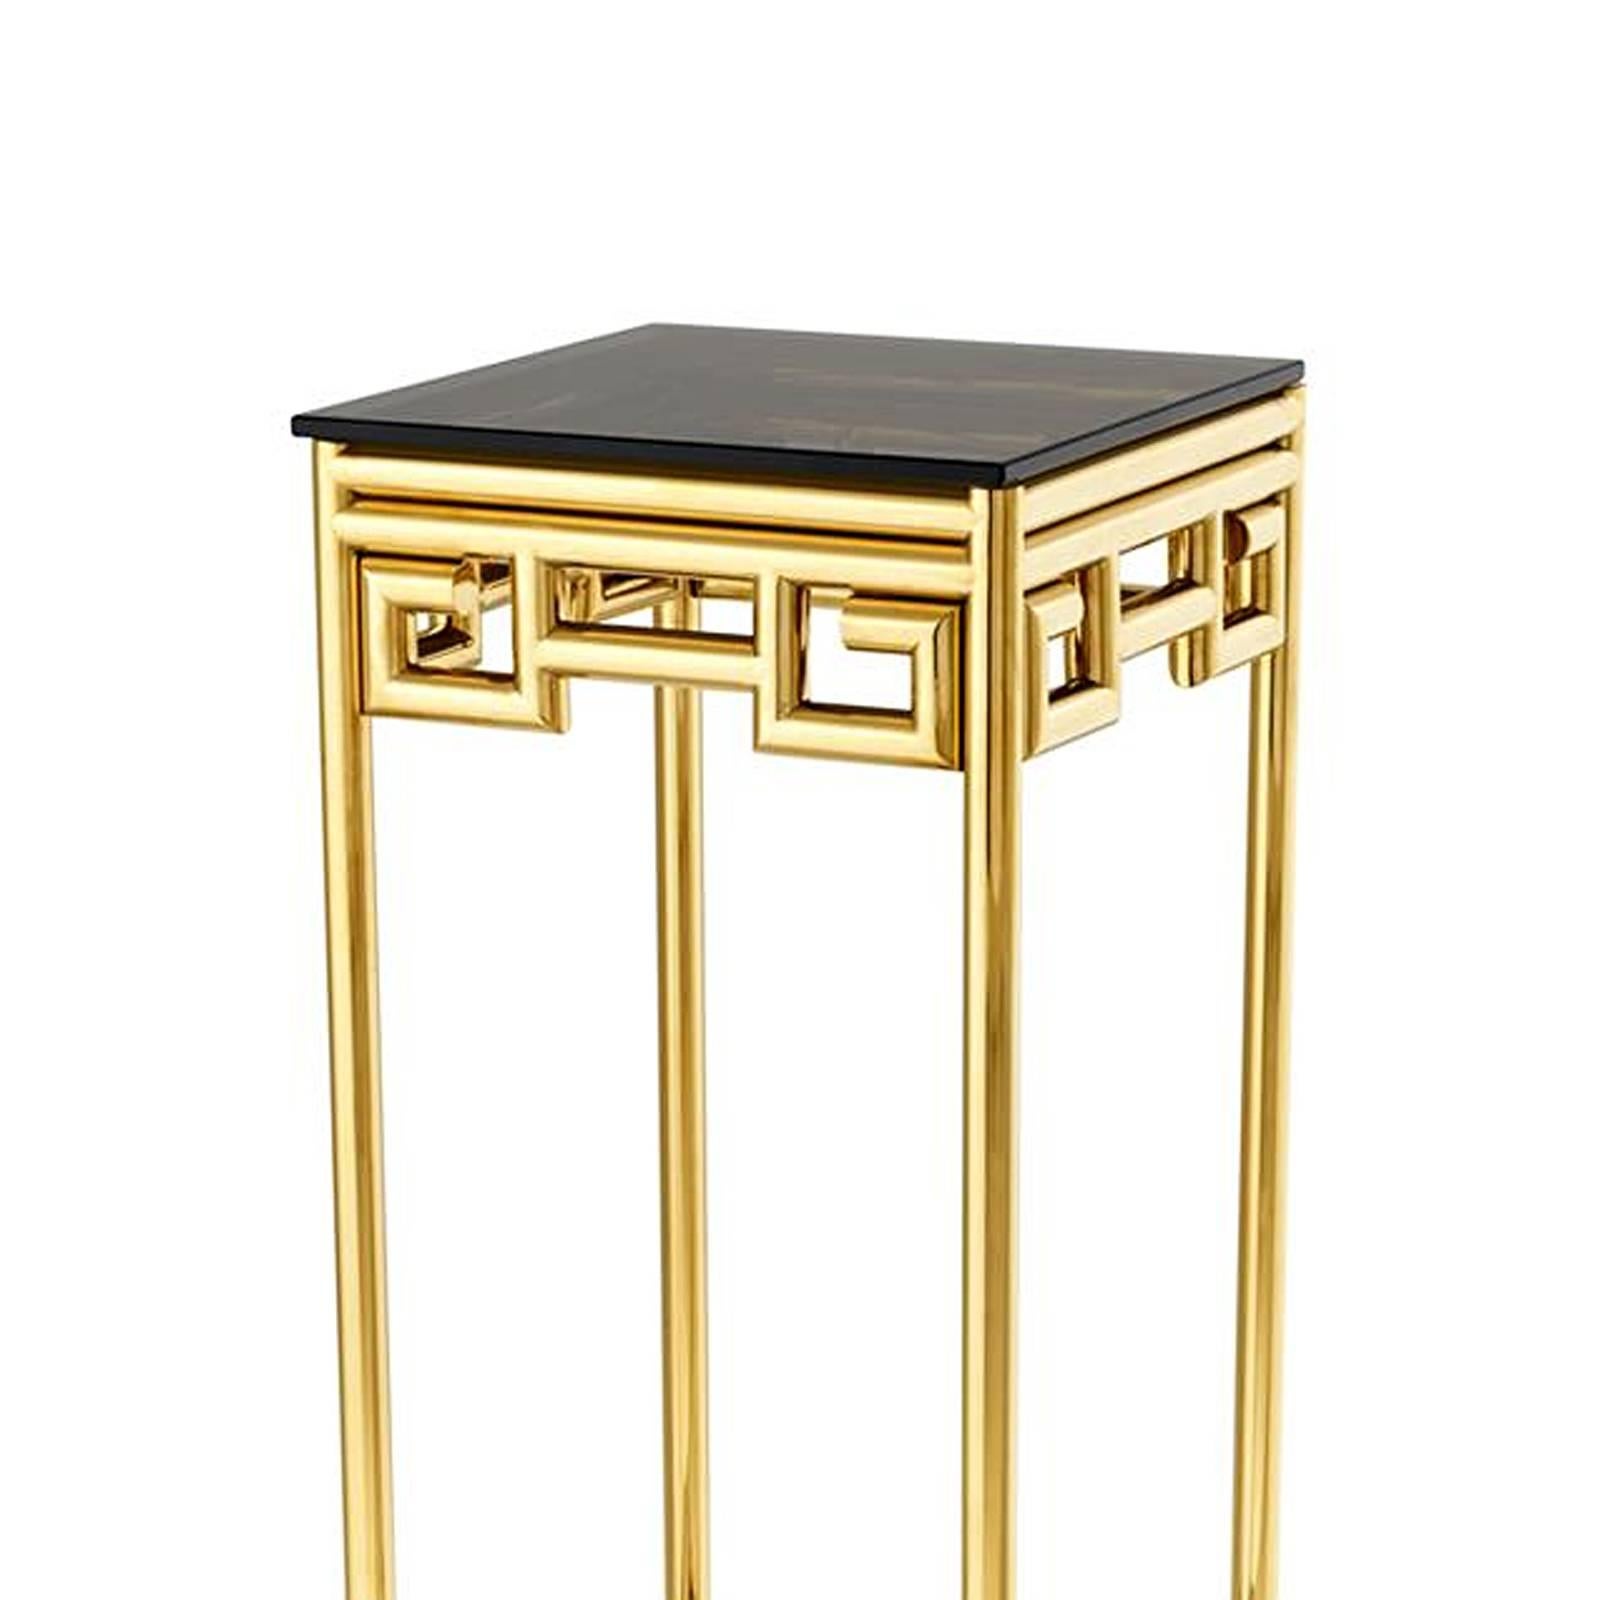 Column Baroque in polished stainless steel
in gold finish with smoked glass top and base.
